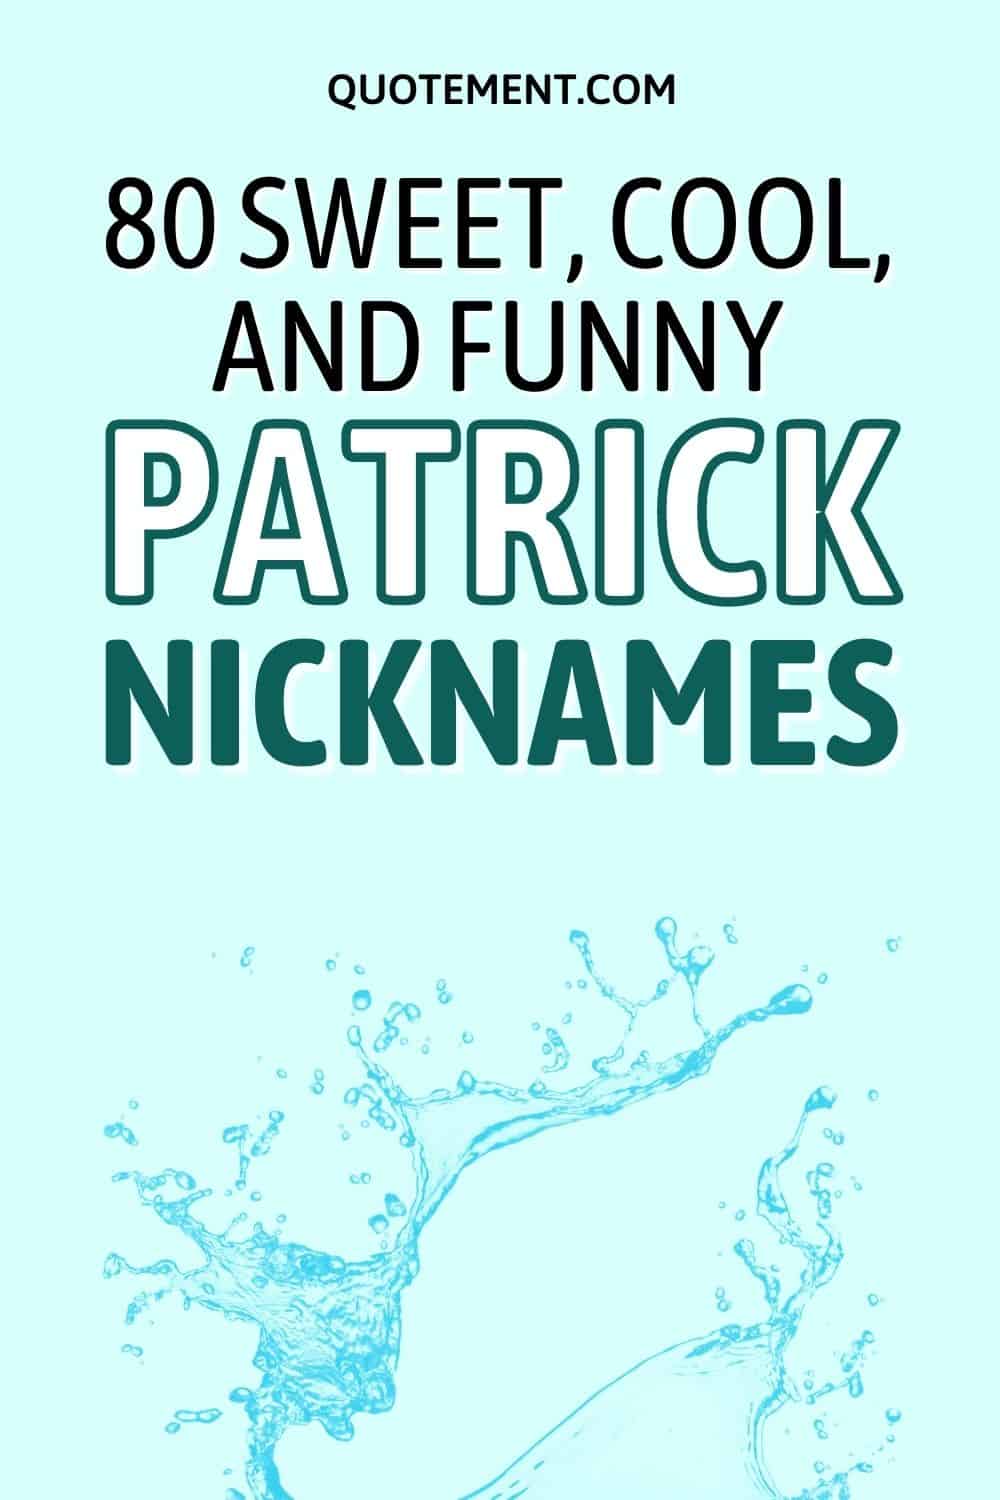 Nicknames For Patrick 80 Cool & Unusual Pet Name Ideas